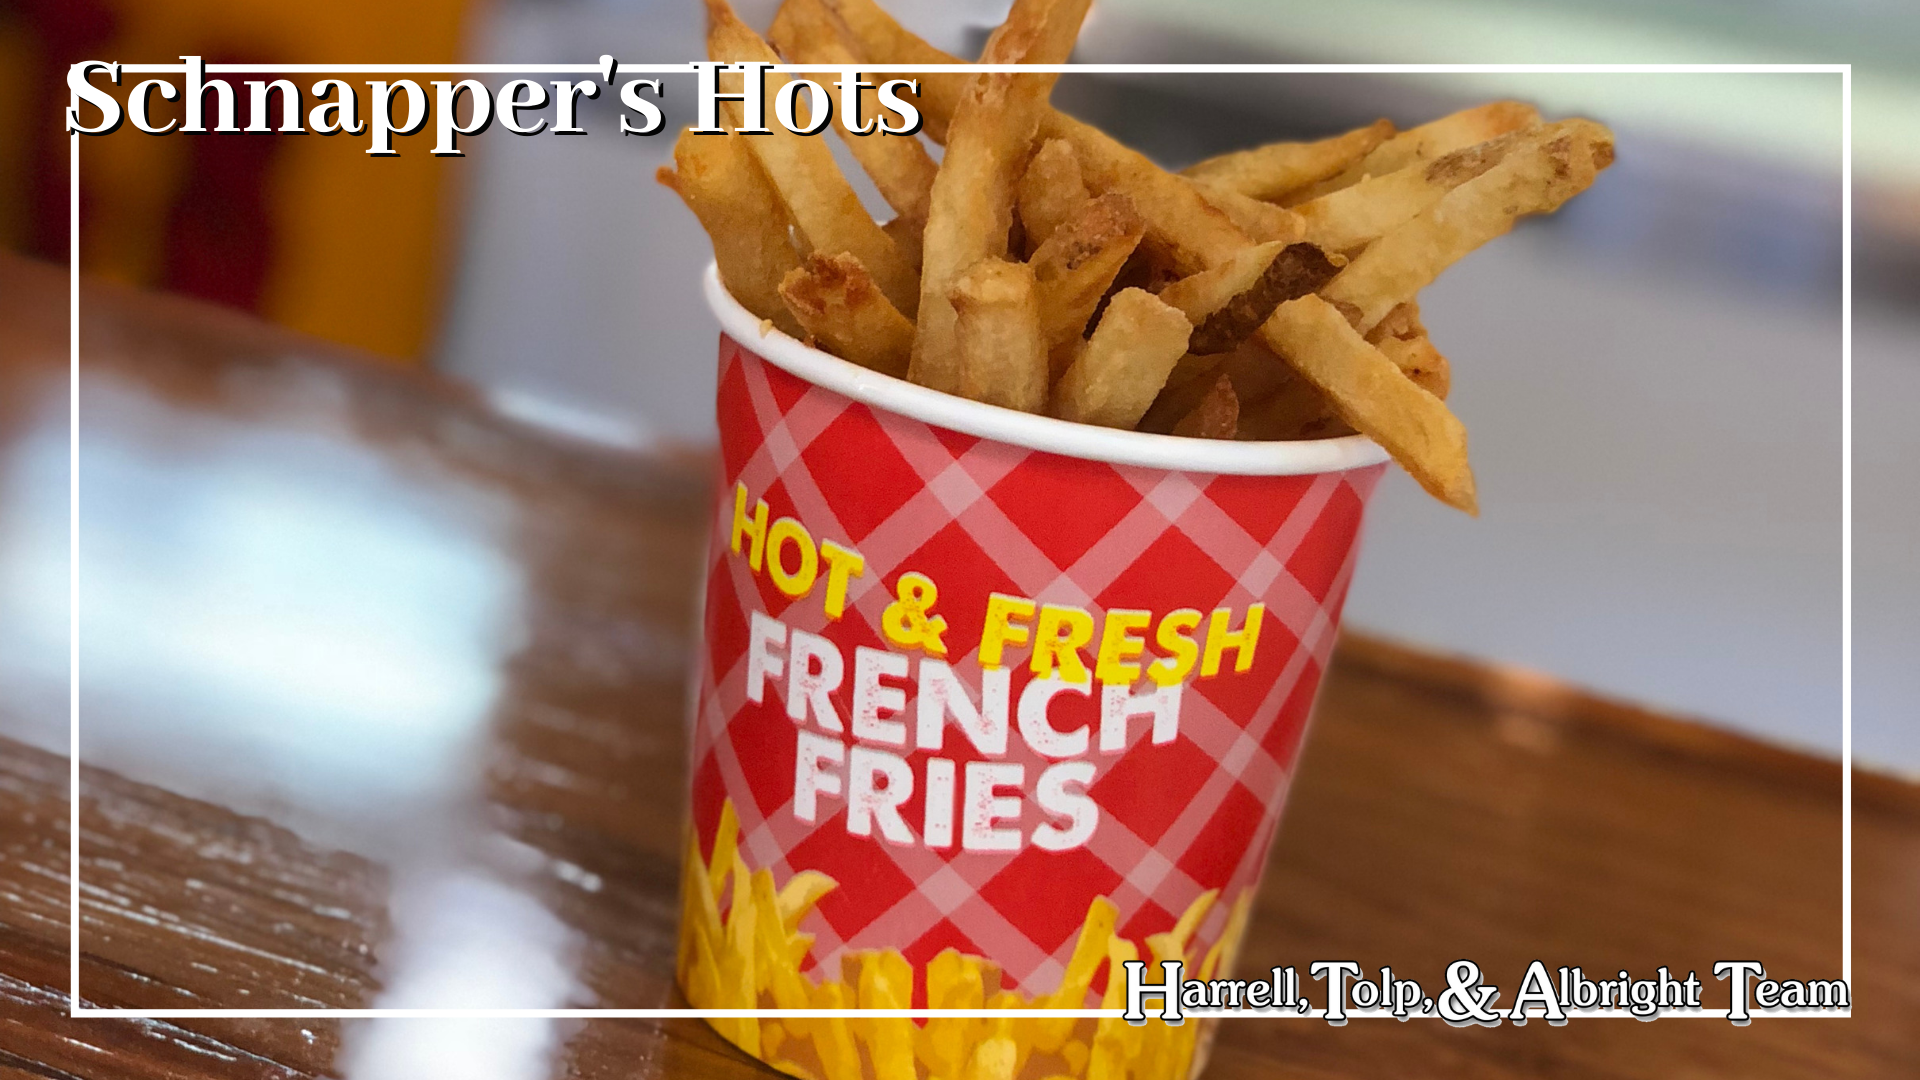 Schnapper's Hots French Fries